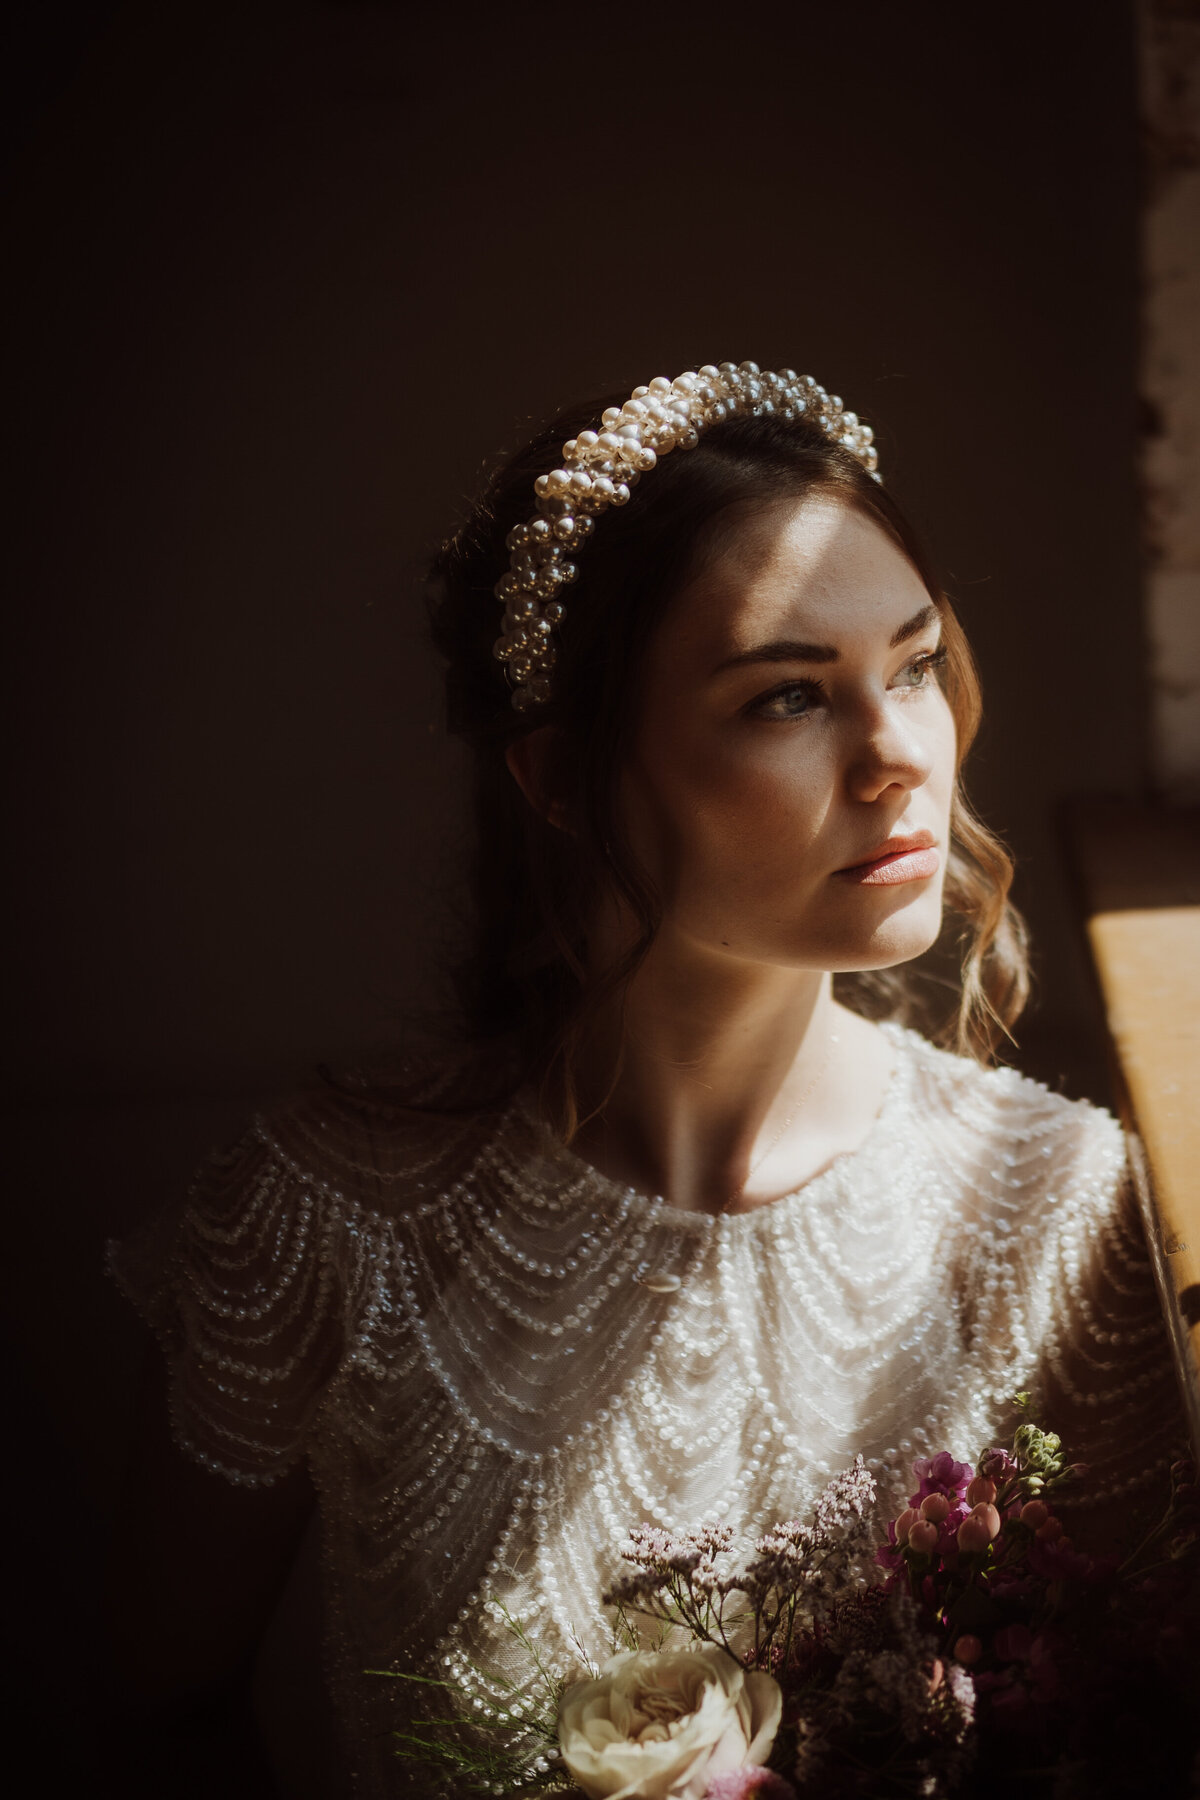 Bride staring out of window with sparkly dress on